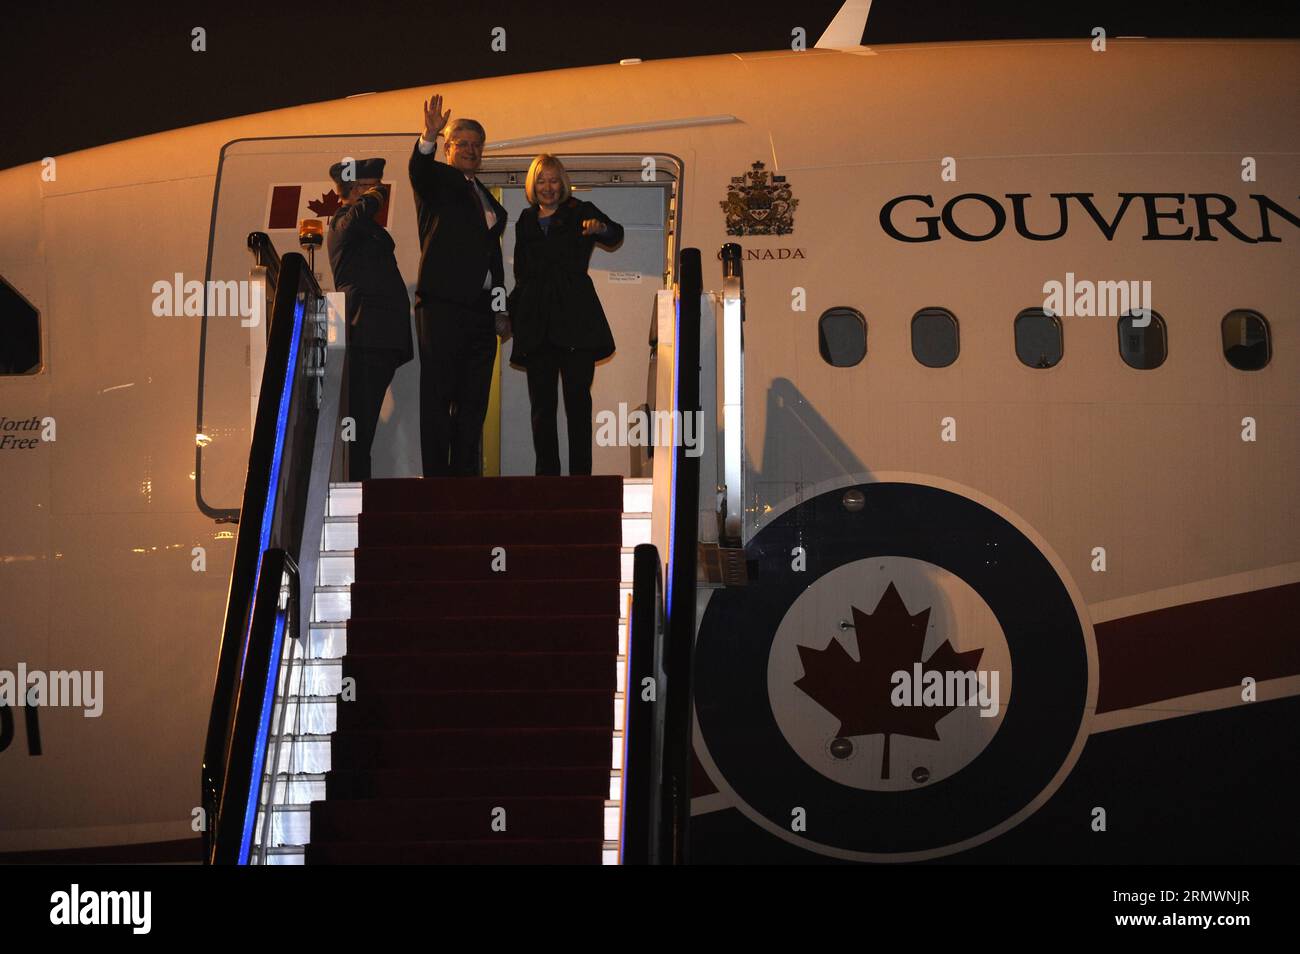 (141106) -- HANGZHOU, Nov. 6, 2014 -- Canadian Prime Minister Stephen Harper arrives in Hangzhou, east China s Zhejiang Province, Nov. 6, 2014. Stephen Harper arrived here Thursday evening for a five-day official visit to China and events related to the Asia-Pacific Economic Cooperation (APEC) meeting. ) (wyl) CHINA-HANGZHOU-CANADA-STEPHEN HARPER-ARRIVAL (CN) JuxHuanzong PUBLICATIONxNOTxINxCHN   Hangzhou Nov 6 2014 Canadian Prime Ministers Stephen Harper arrives in Hangzhou East China S Zhejiang Province Nov 6 2014 Stephen Harper arrived Here Thursday evening for a Five Day Official Visit to C Stock Photo